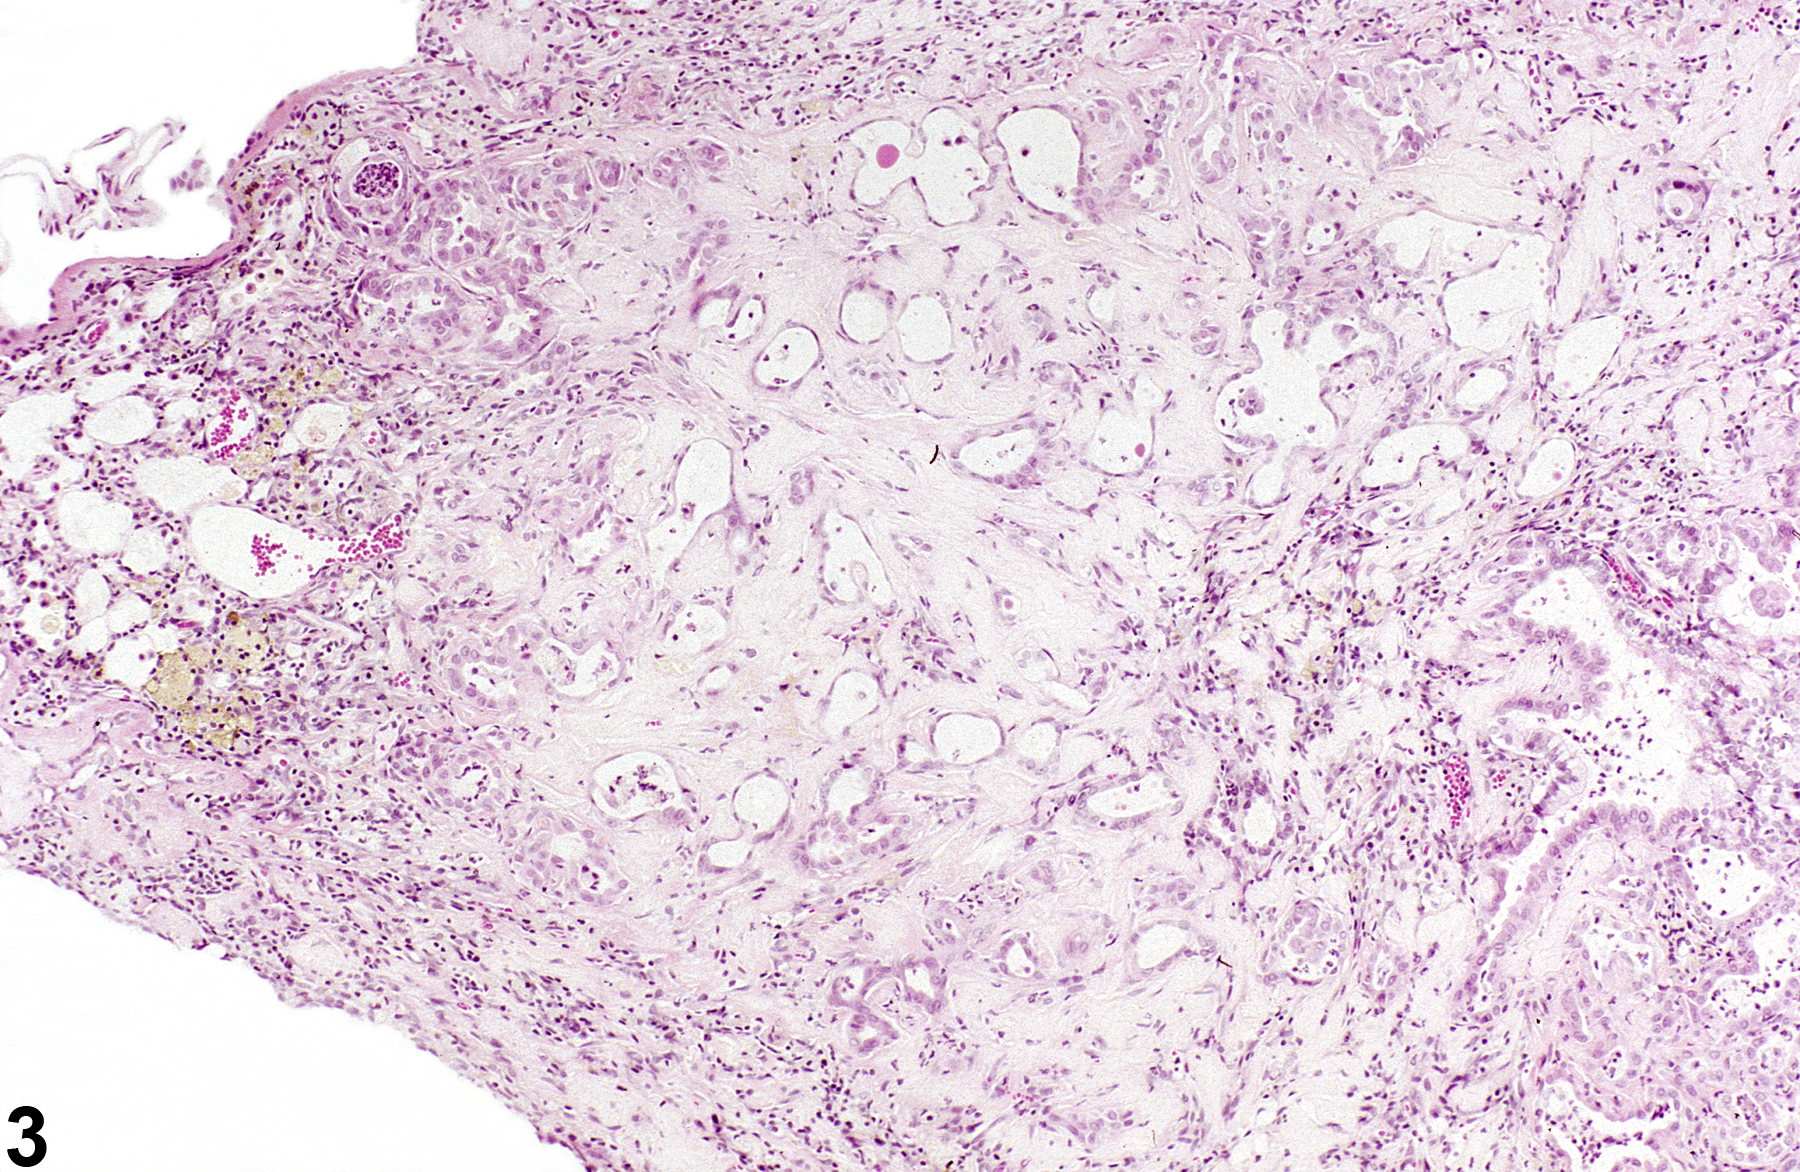 Image of fibrosis in the lung from a male F344/N rat in a chronic study